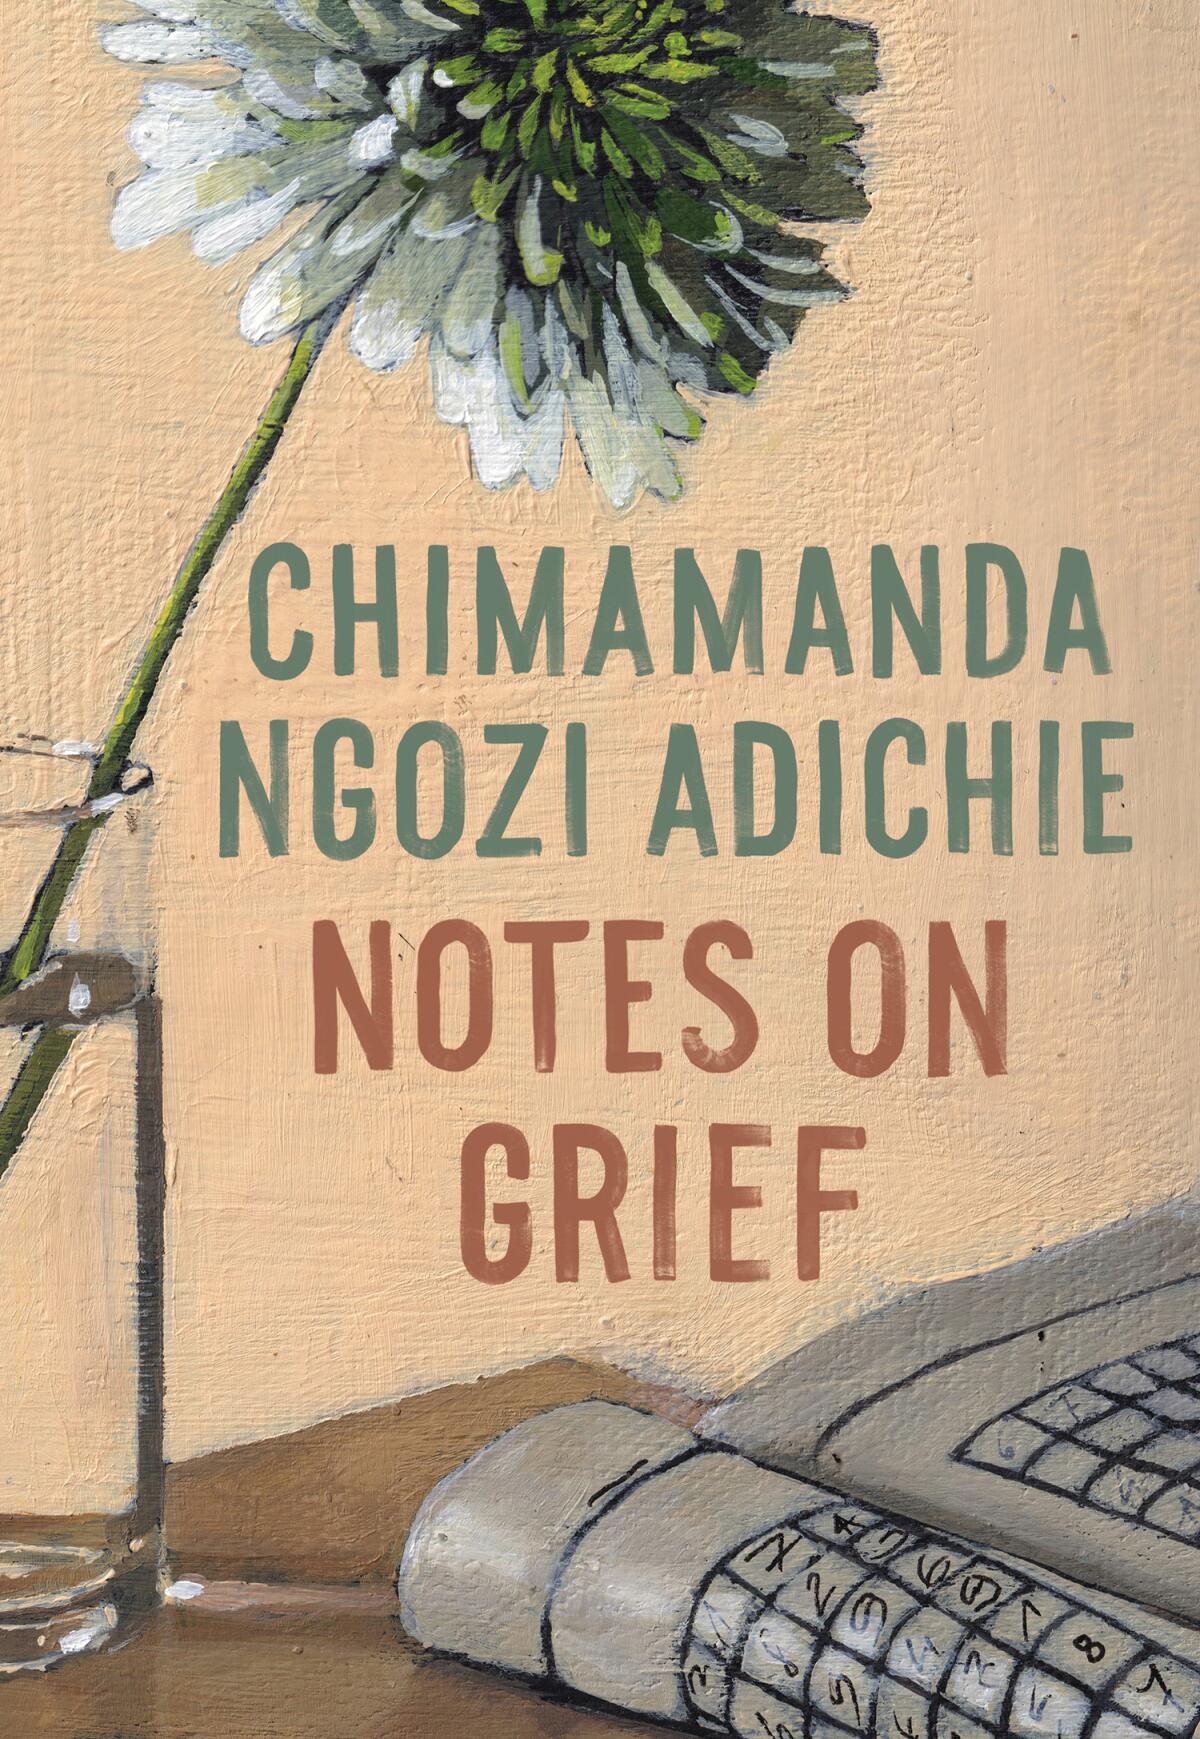 The book cover for "Notes on Grief" shows a flower in a glass of water and a sudoku puzzle